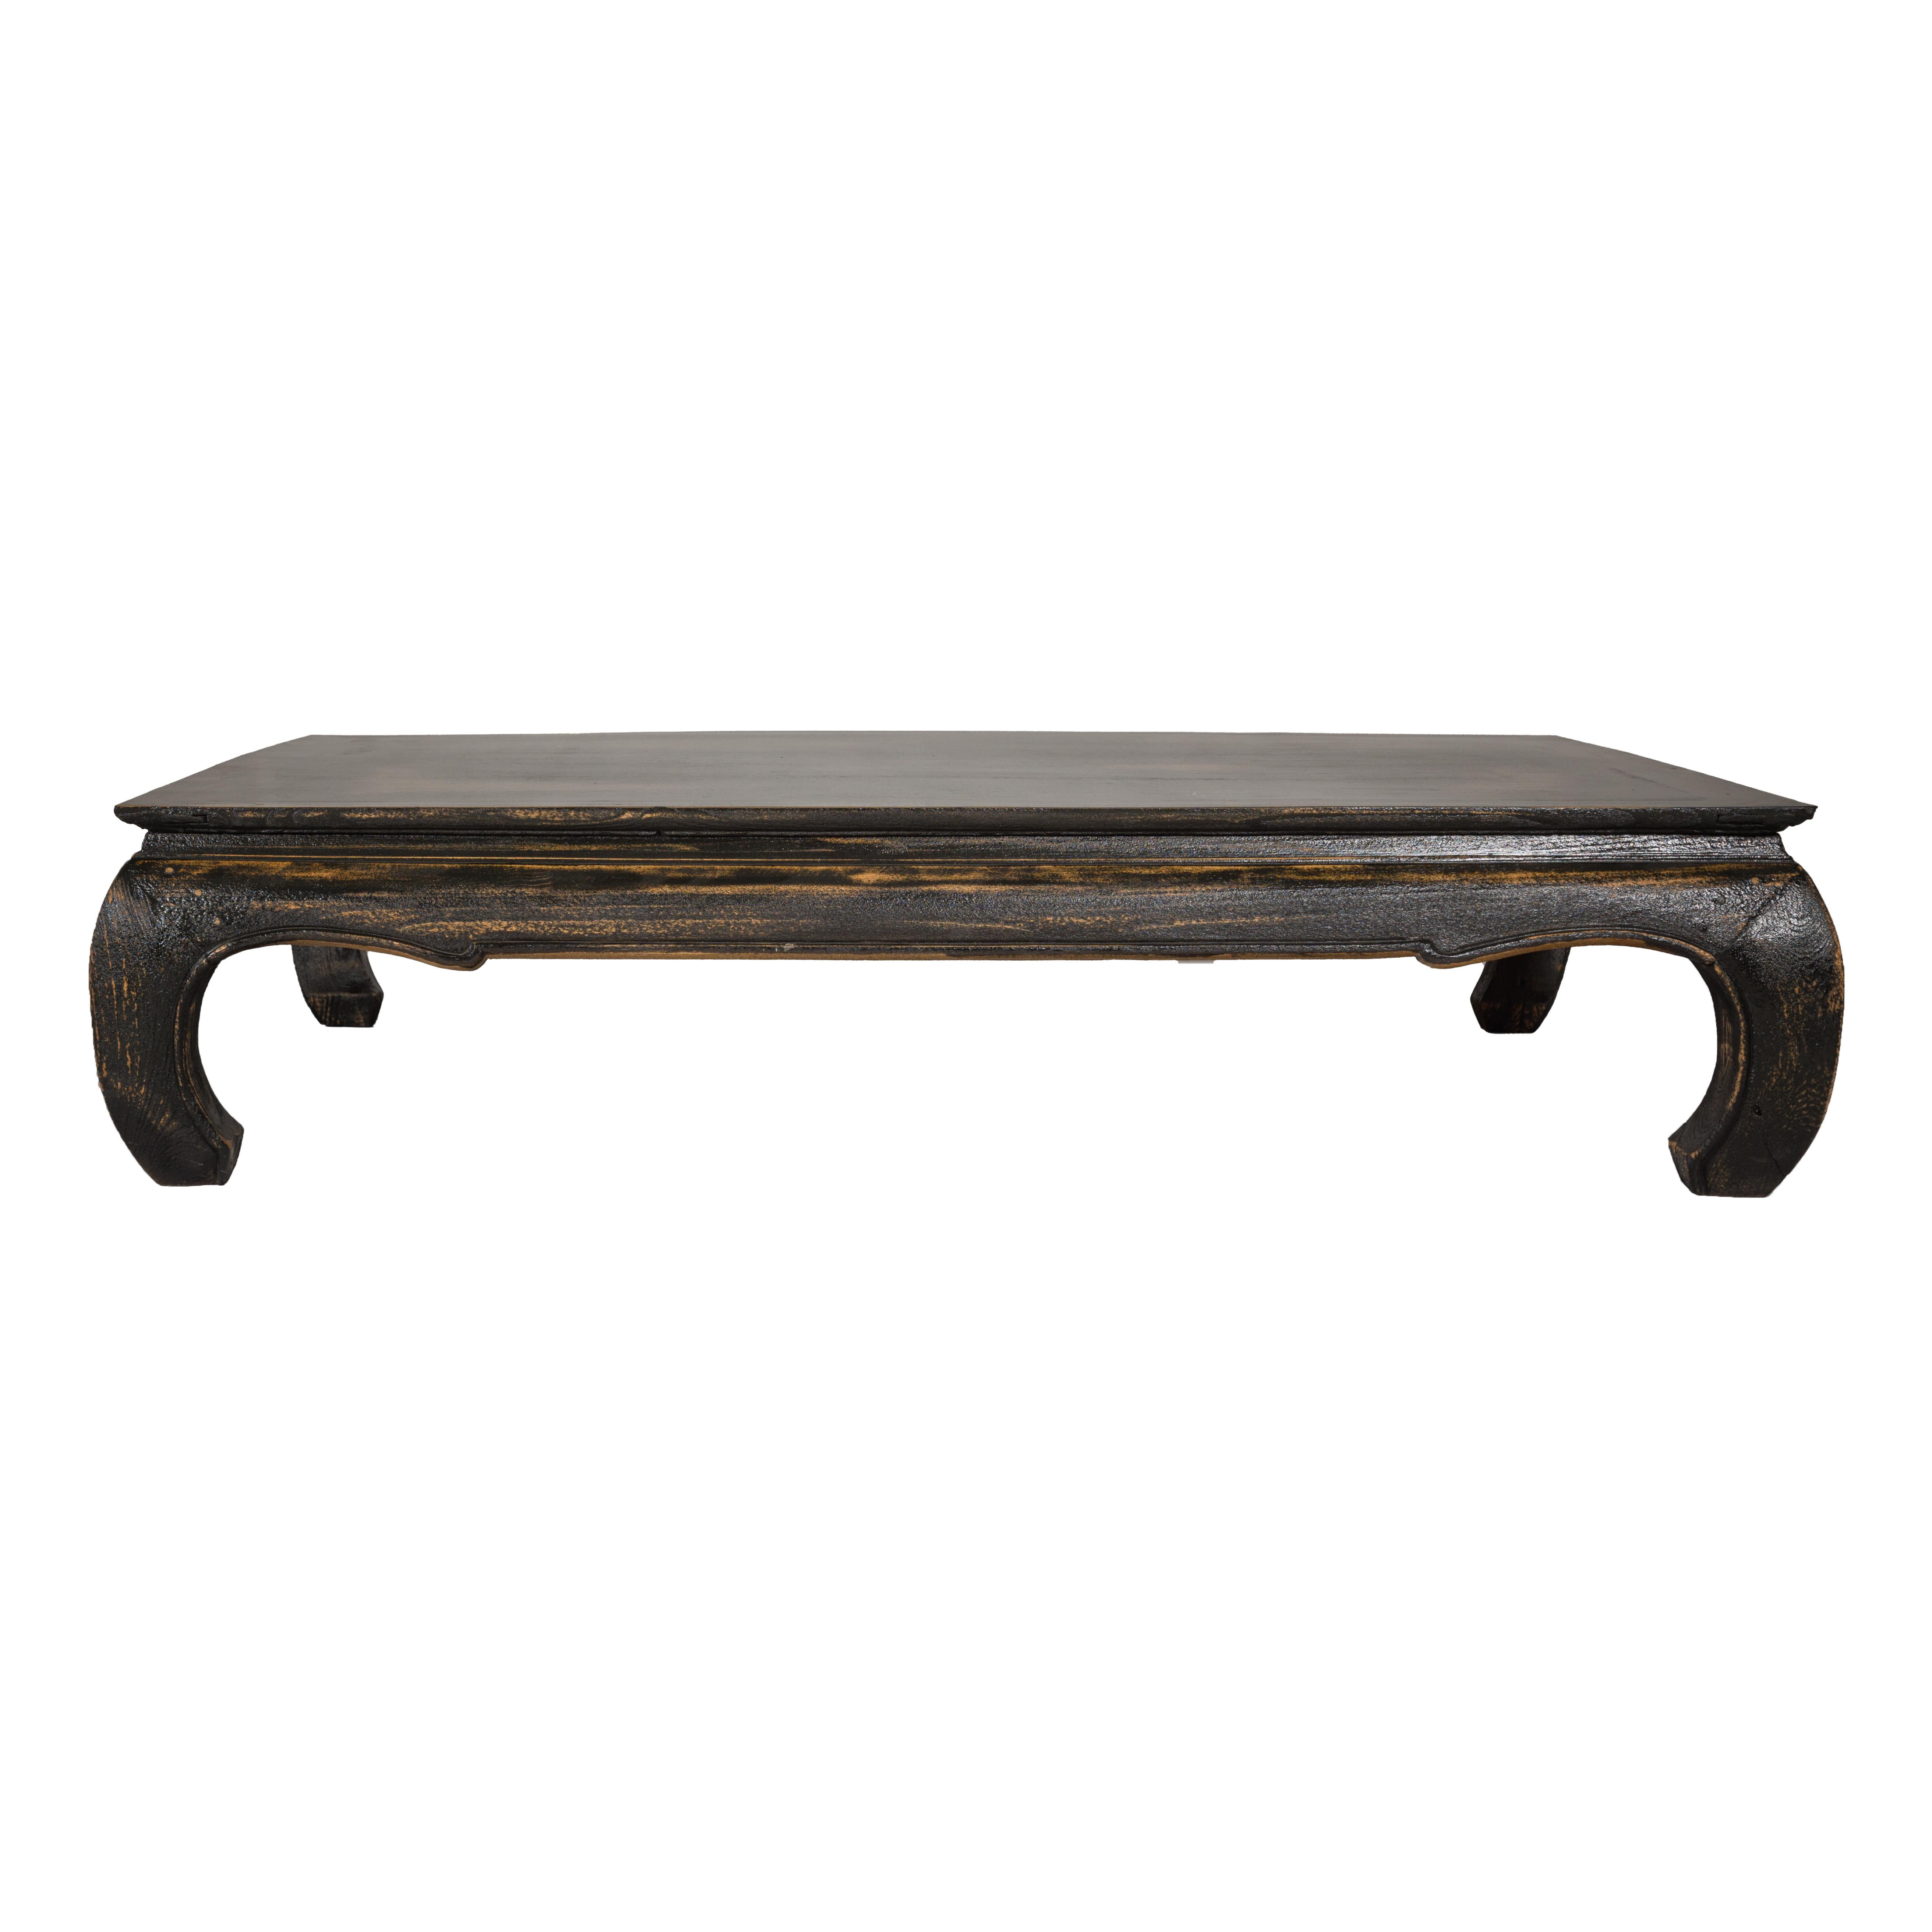 Chow Leg Low Kang Coffee Table with Distressed Black Finish, Midcentury For Sale 9